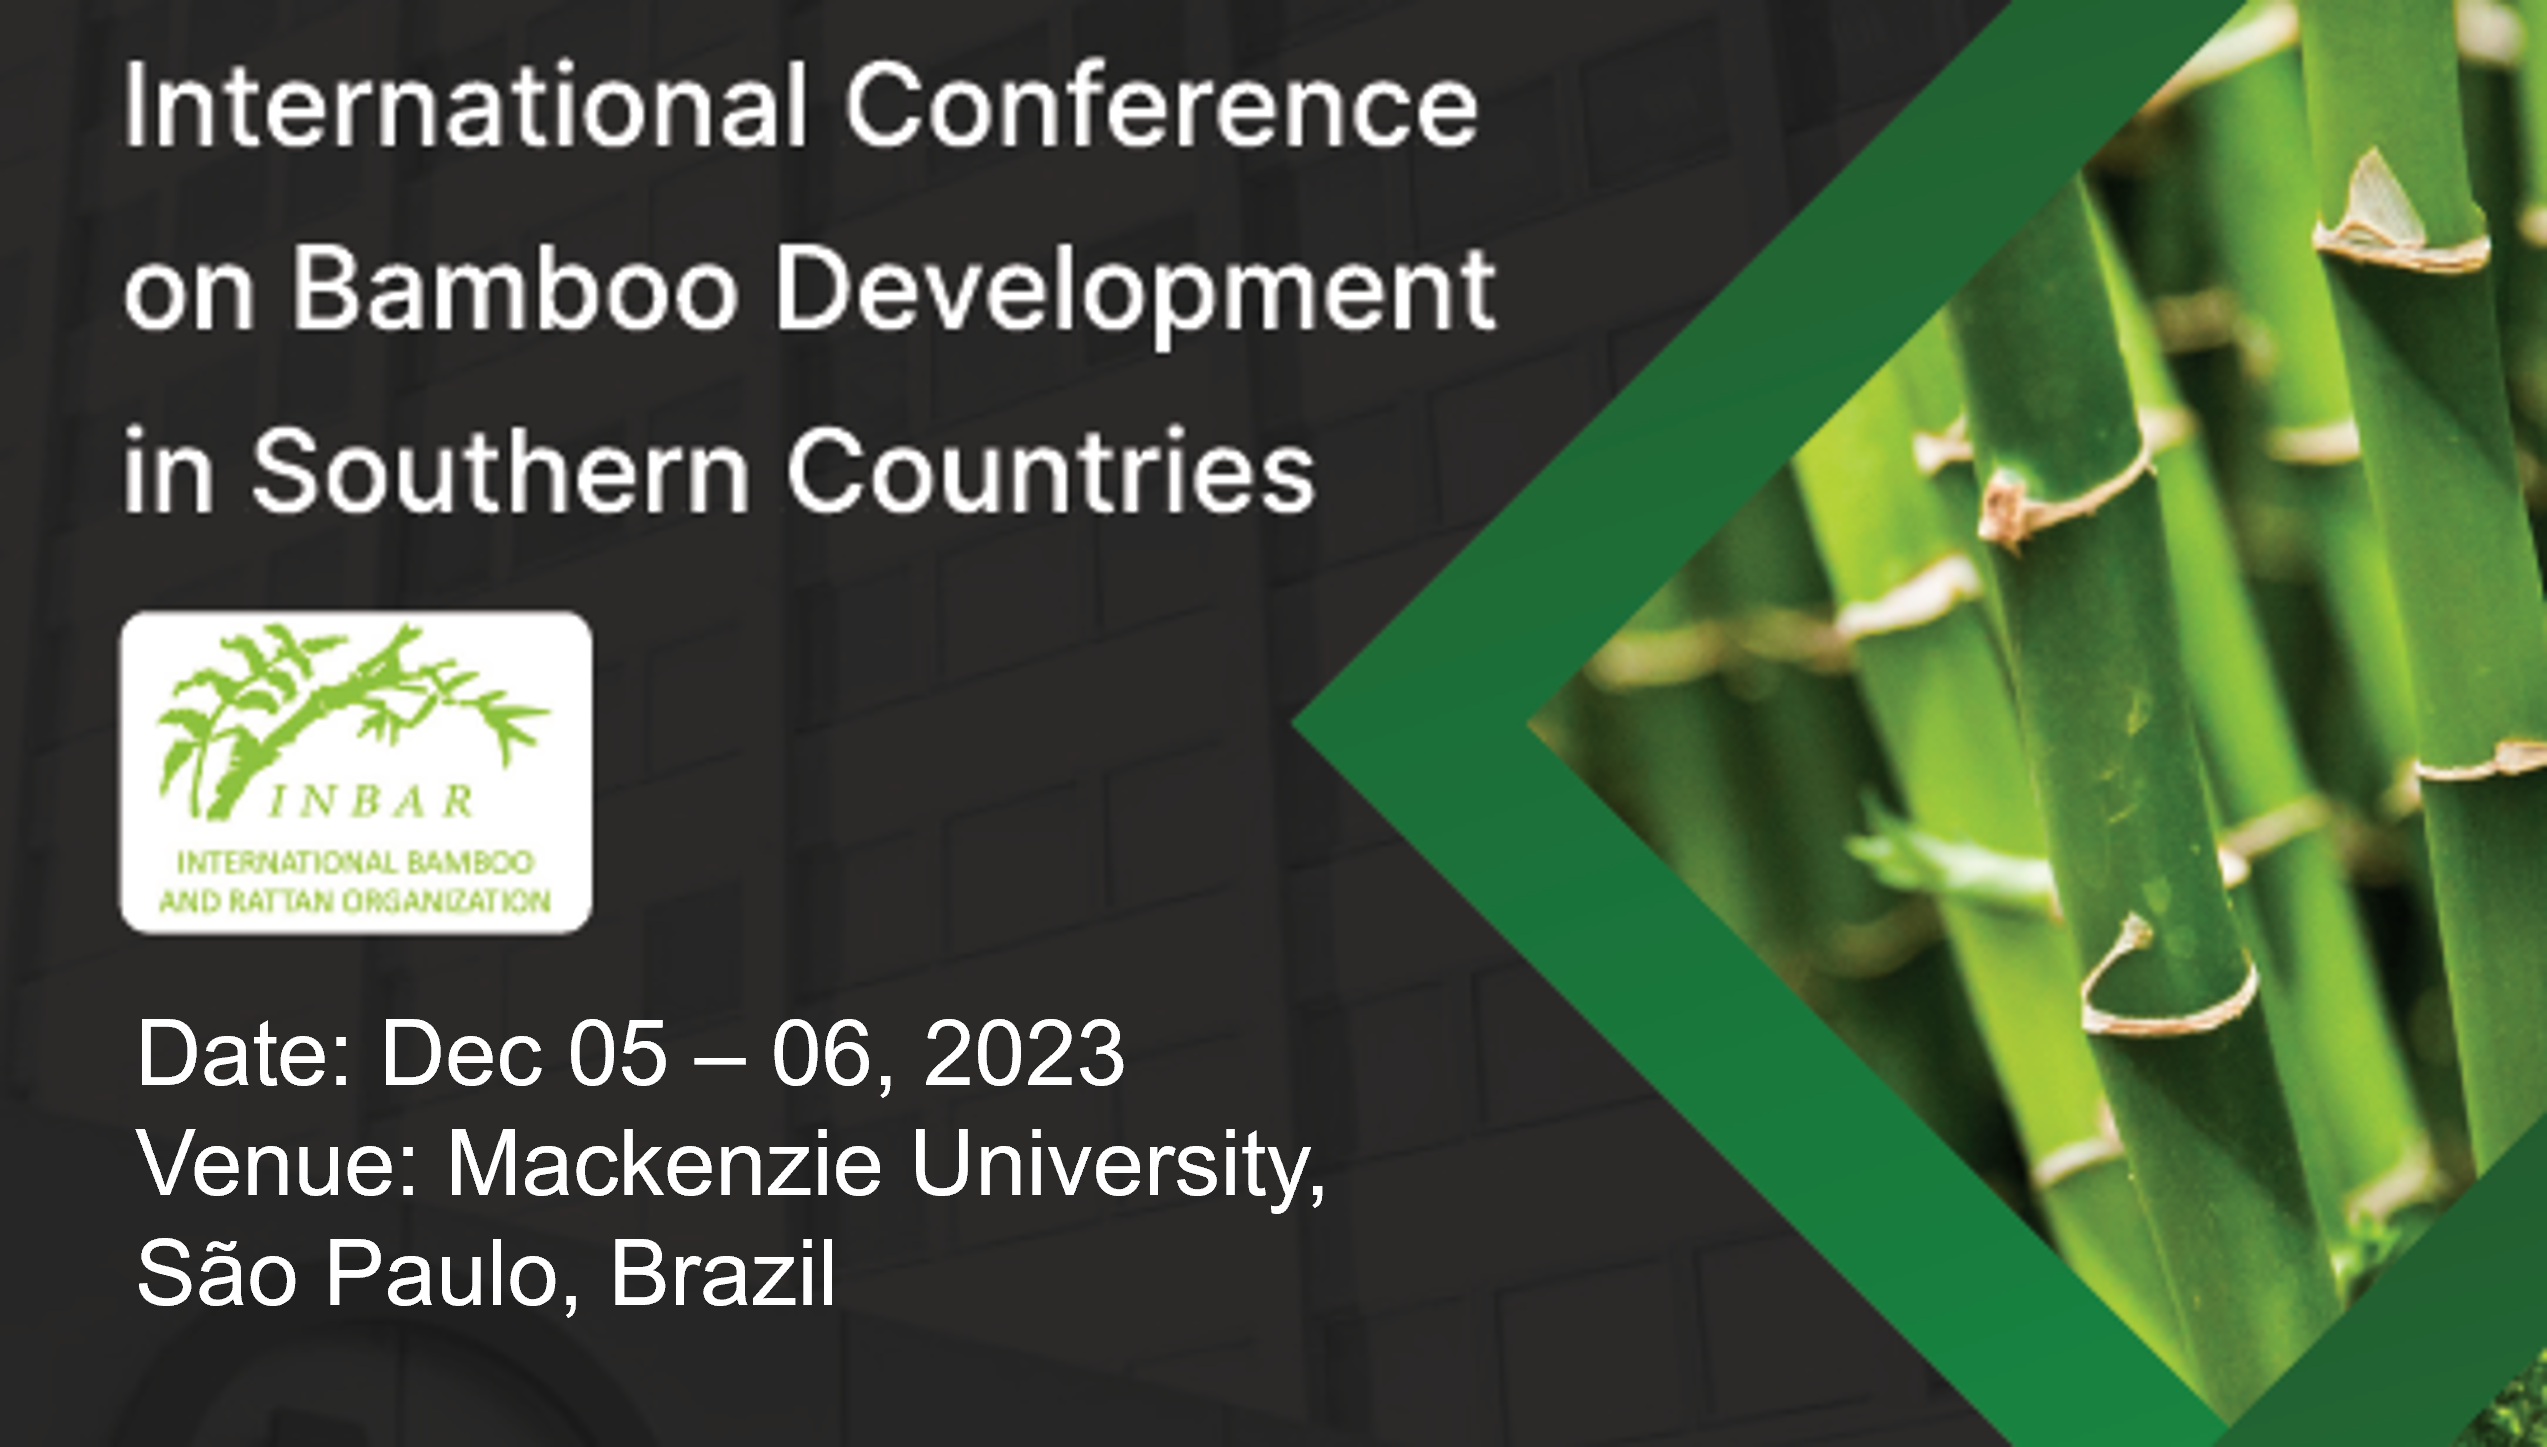 International Conference on Bamboo Development in Southern Countries